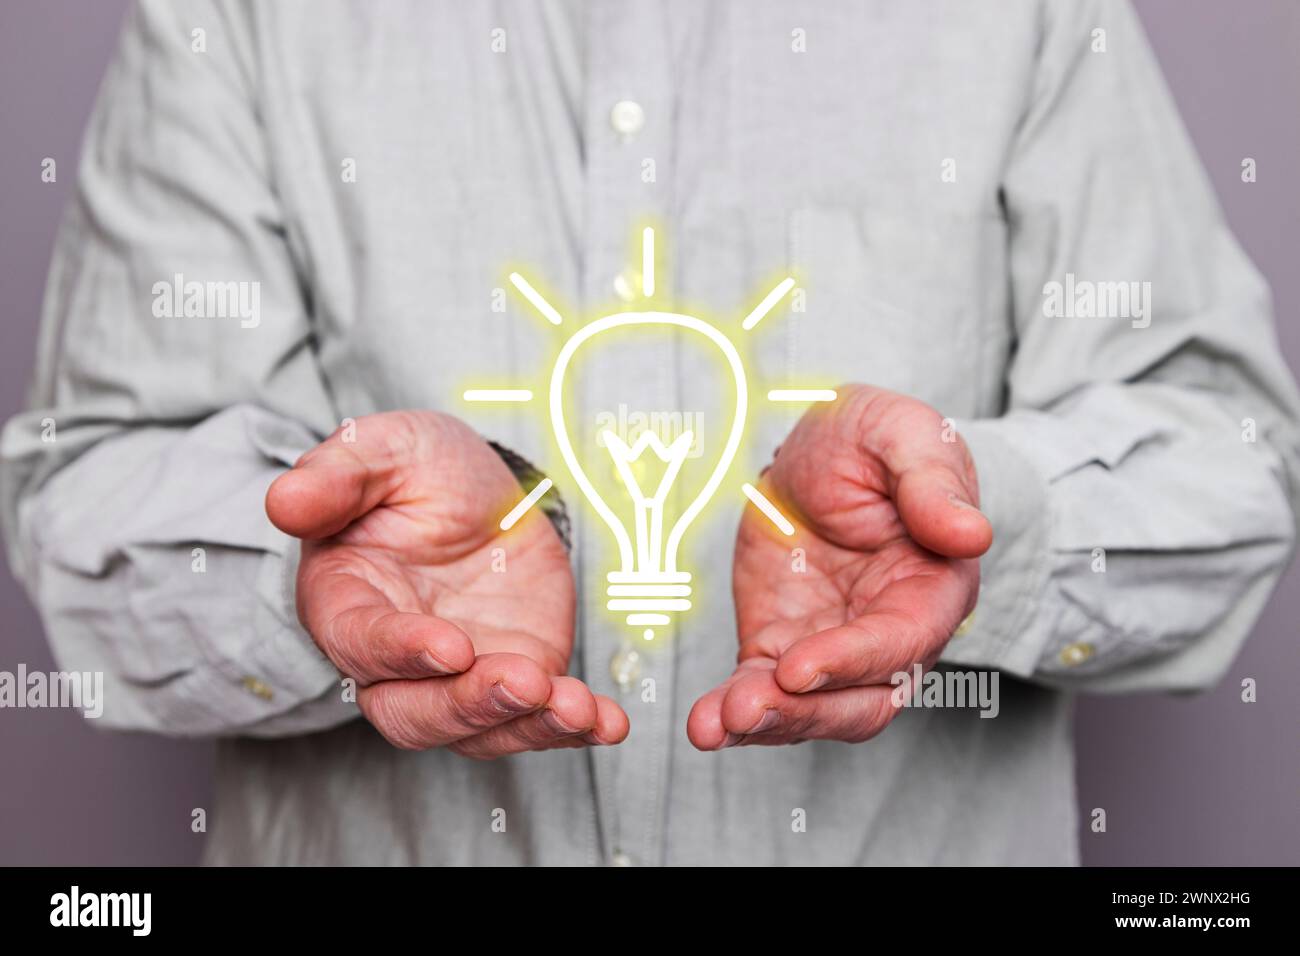 Close-up of an unrecognizable person's hands holding a floating light bulb shape. Stock Photo